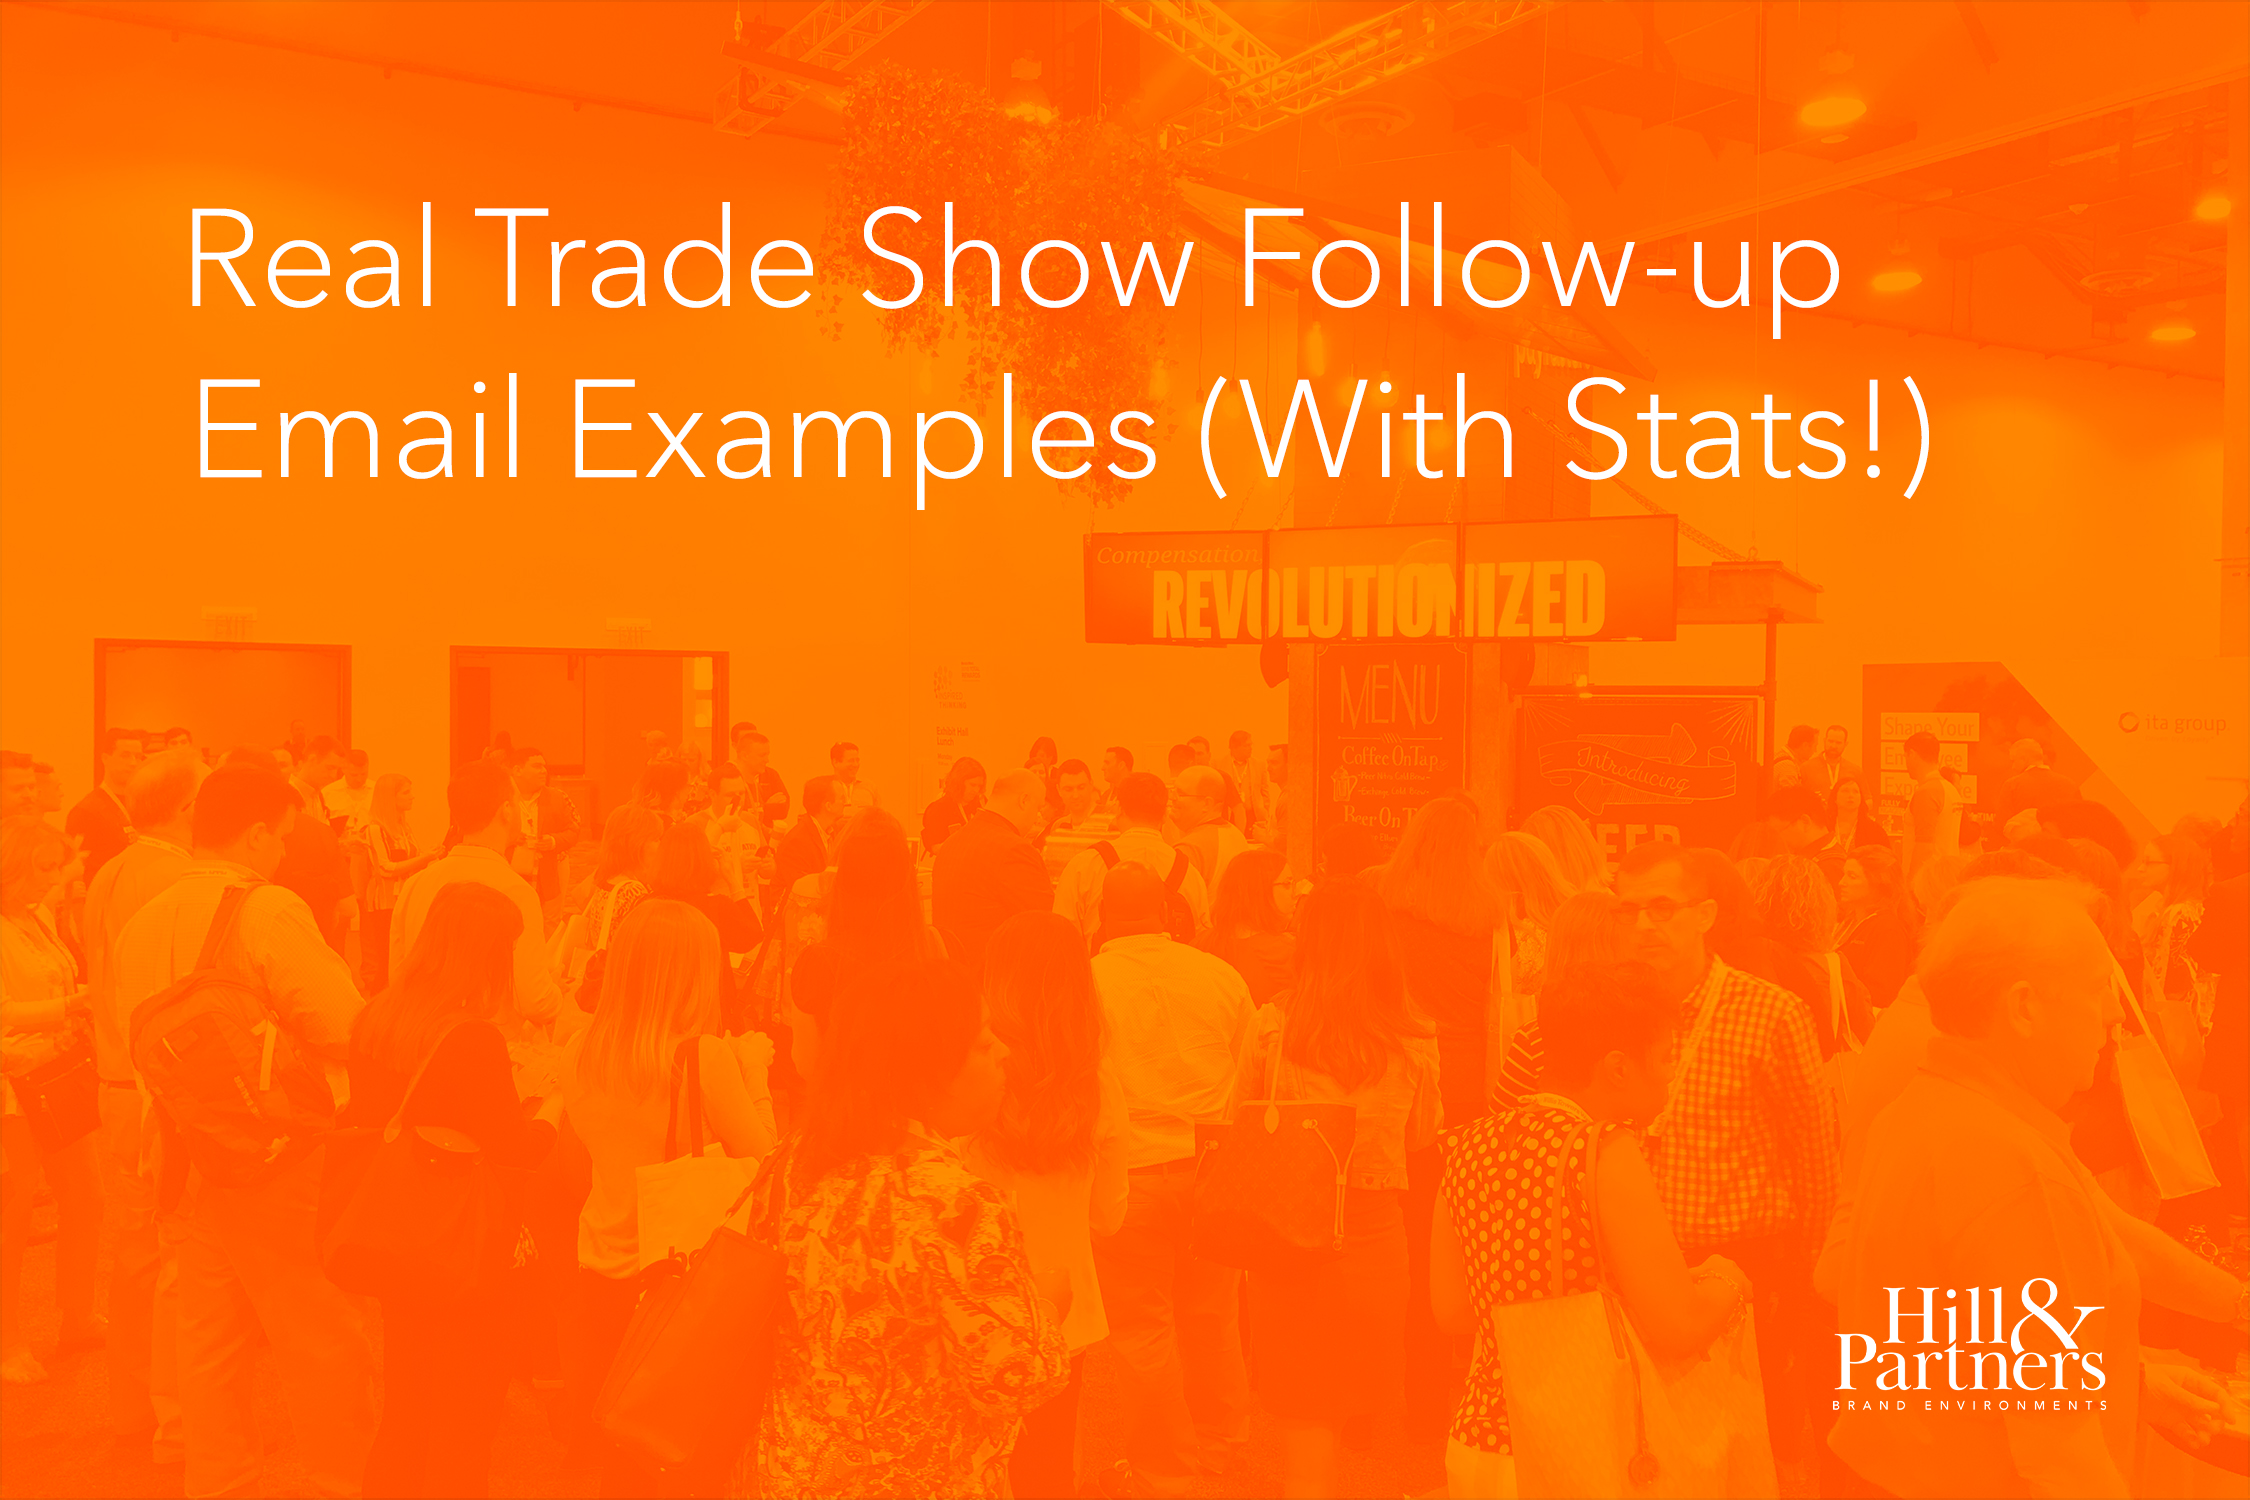 Real Trade Show Follow-up Email Examples (With Stats!)